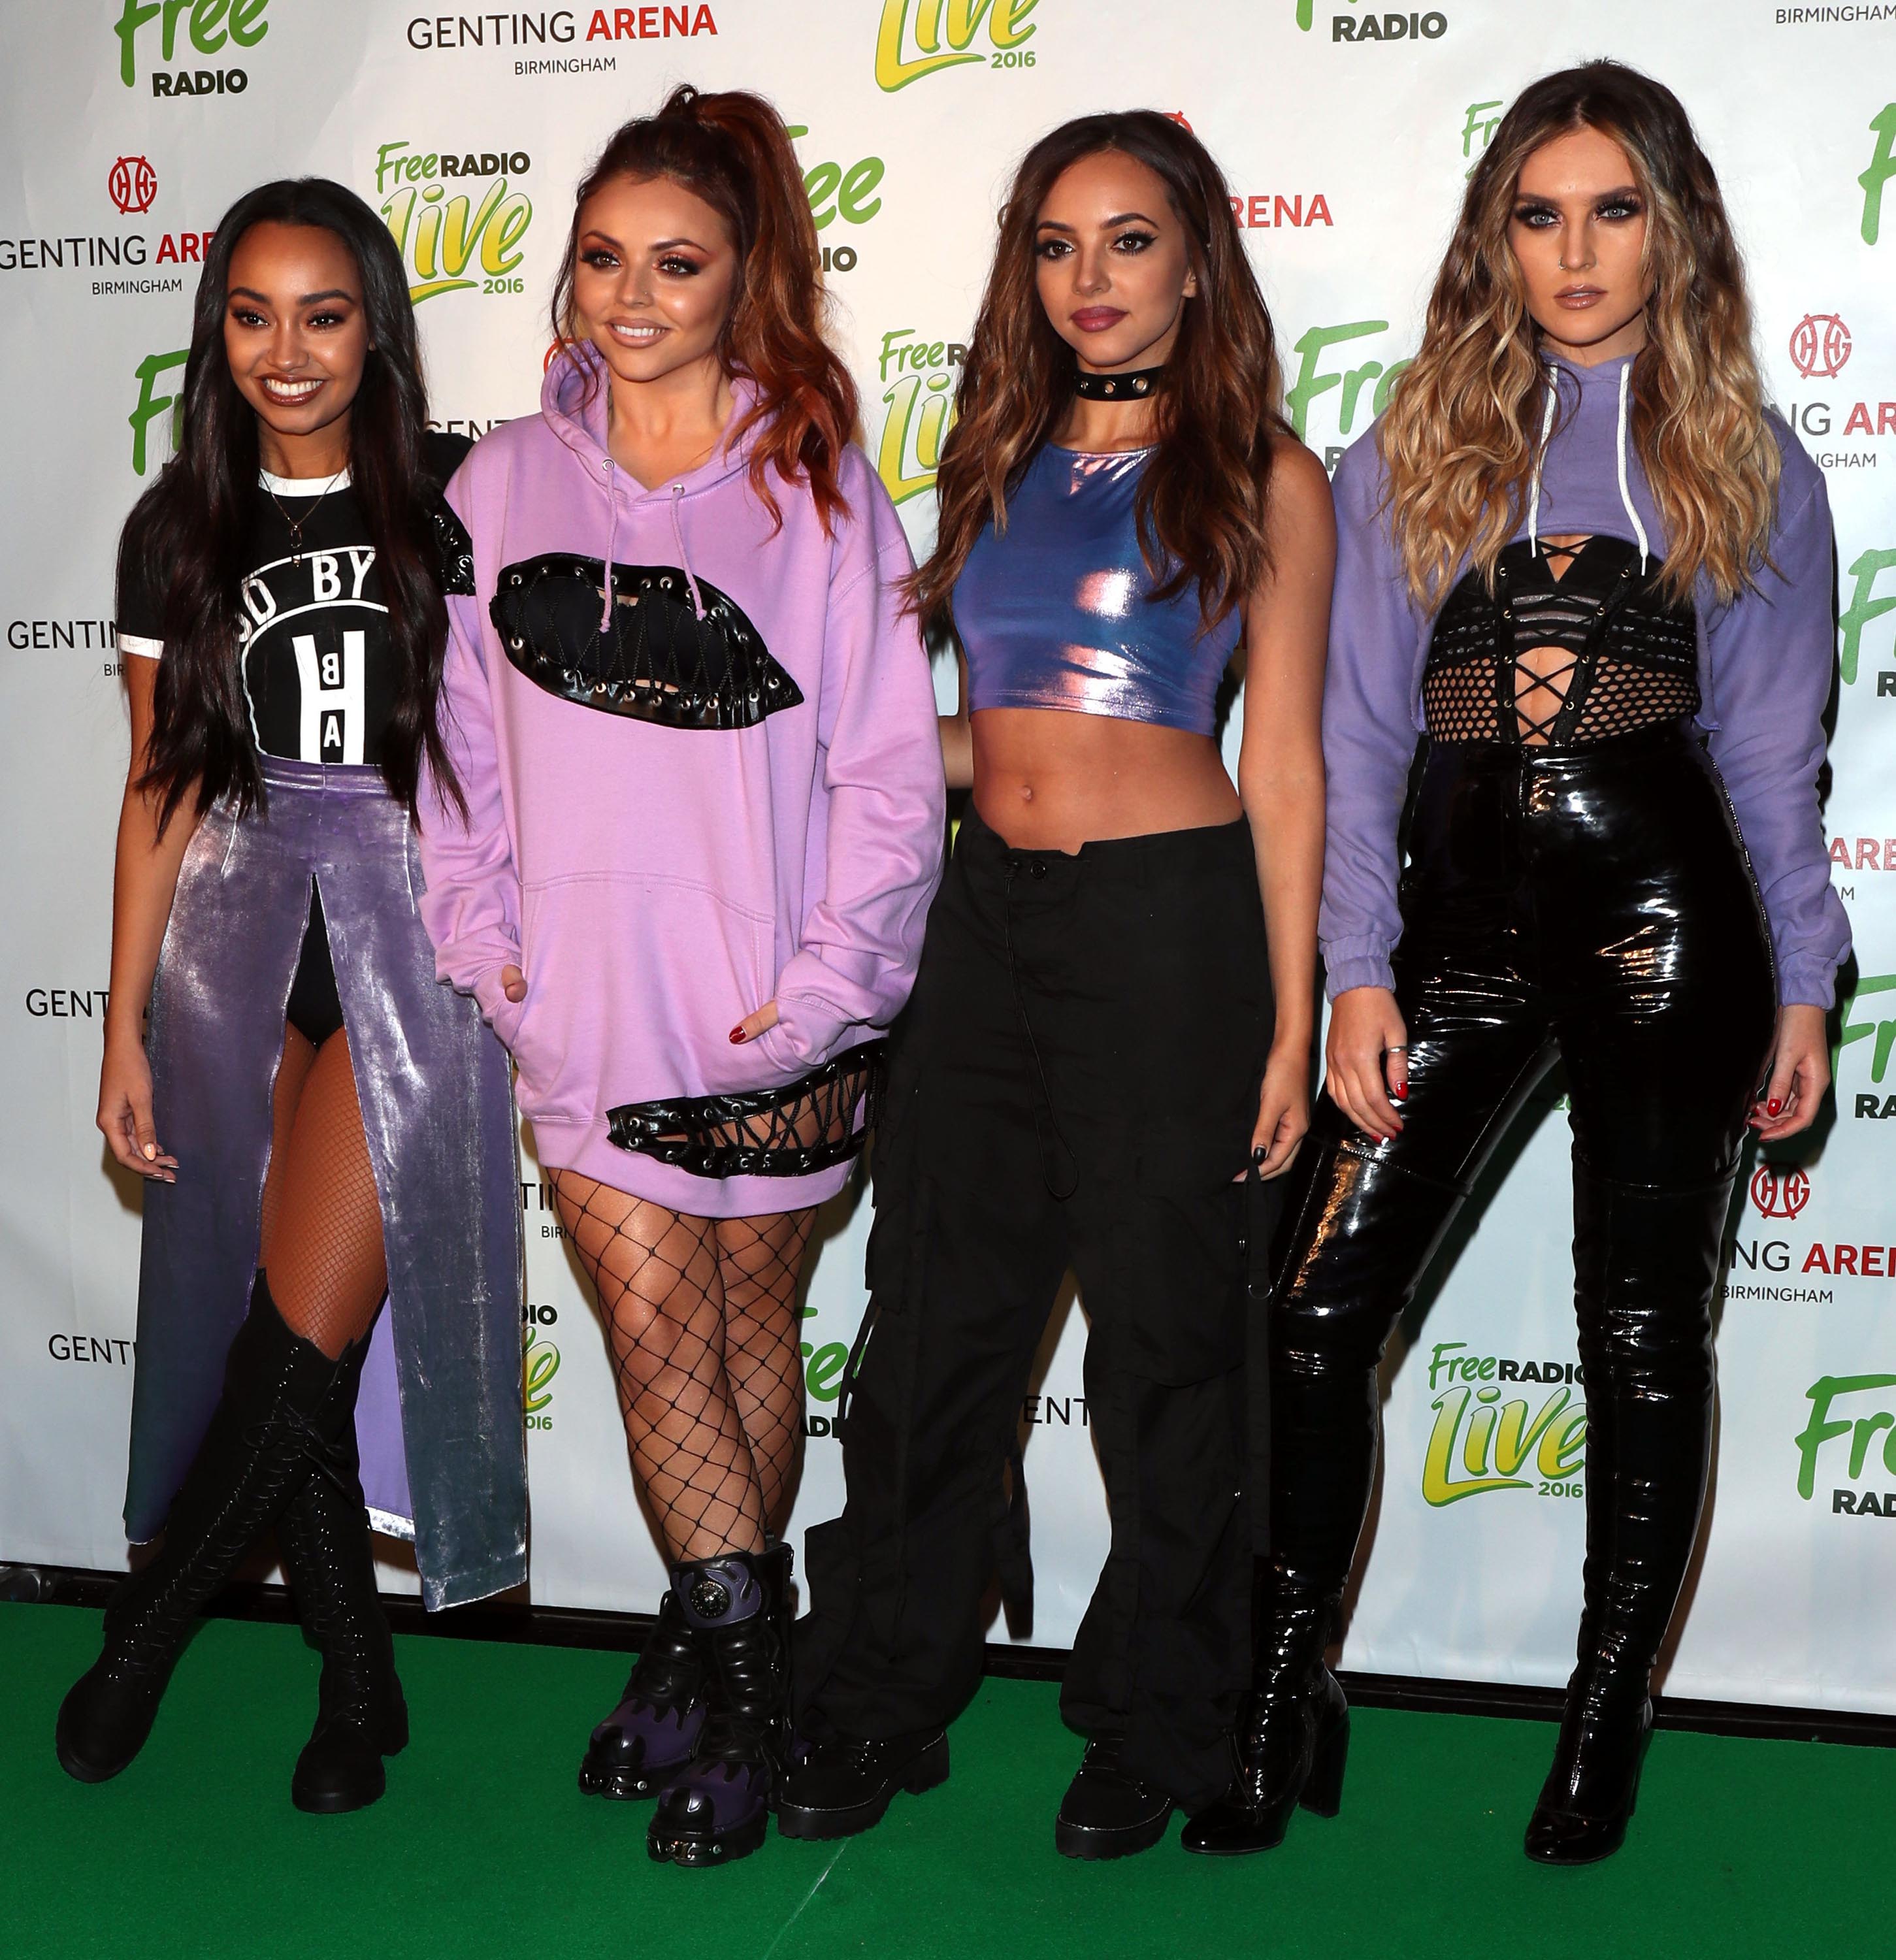 Little Mix performs at Free Radio Live